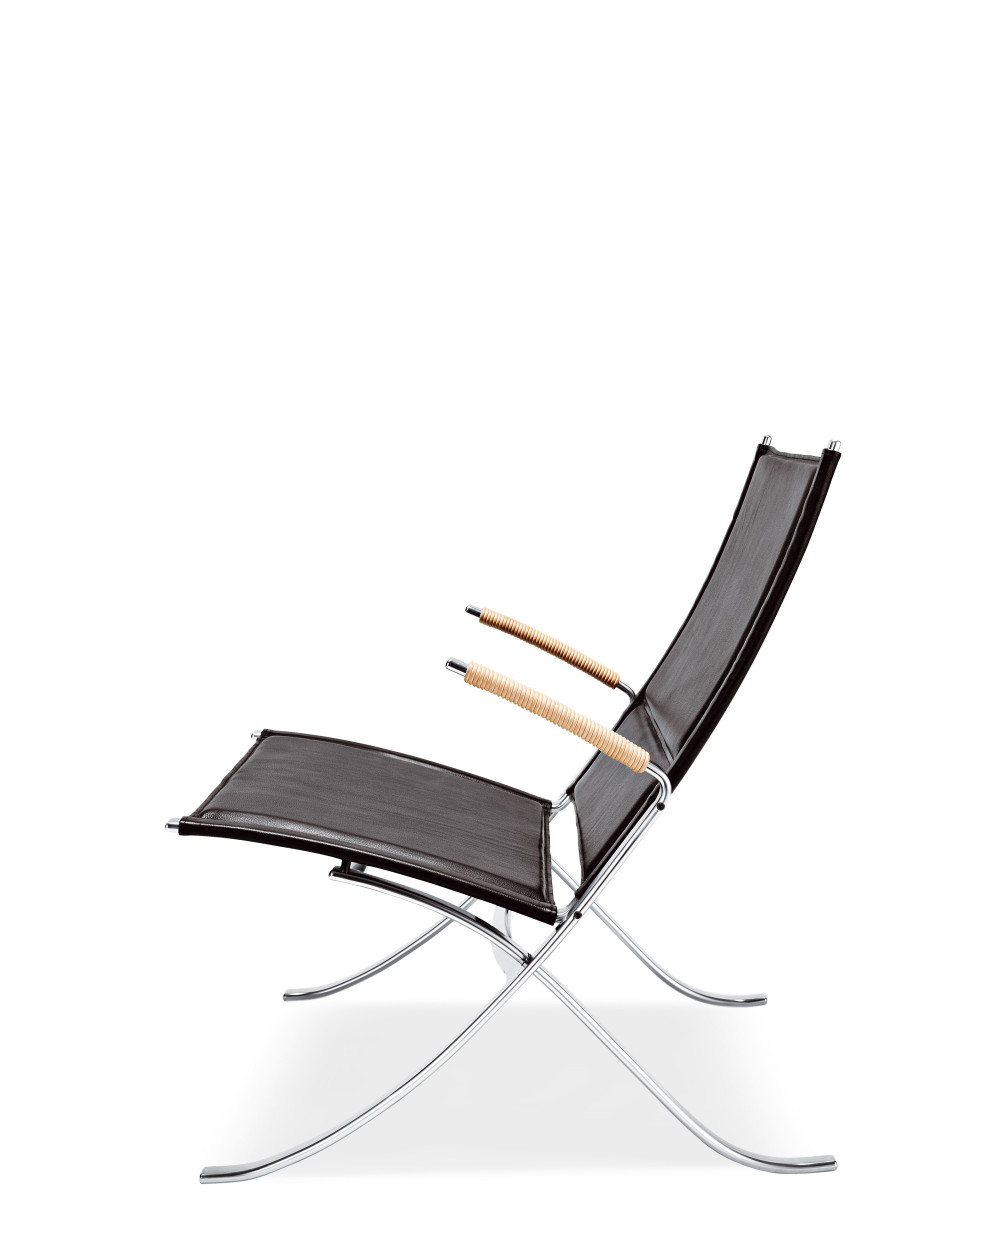 FK 82 armchair, Fabricius and Kastholm design